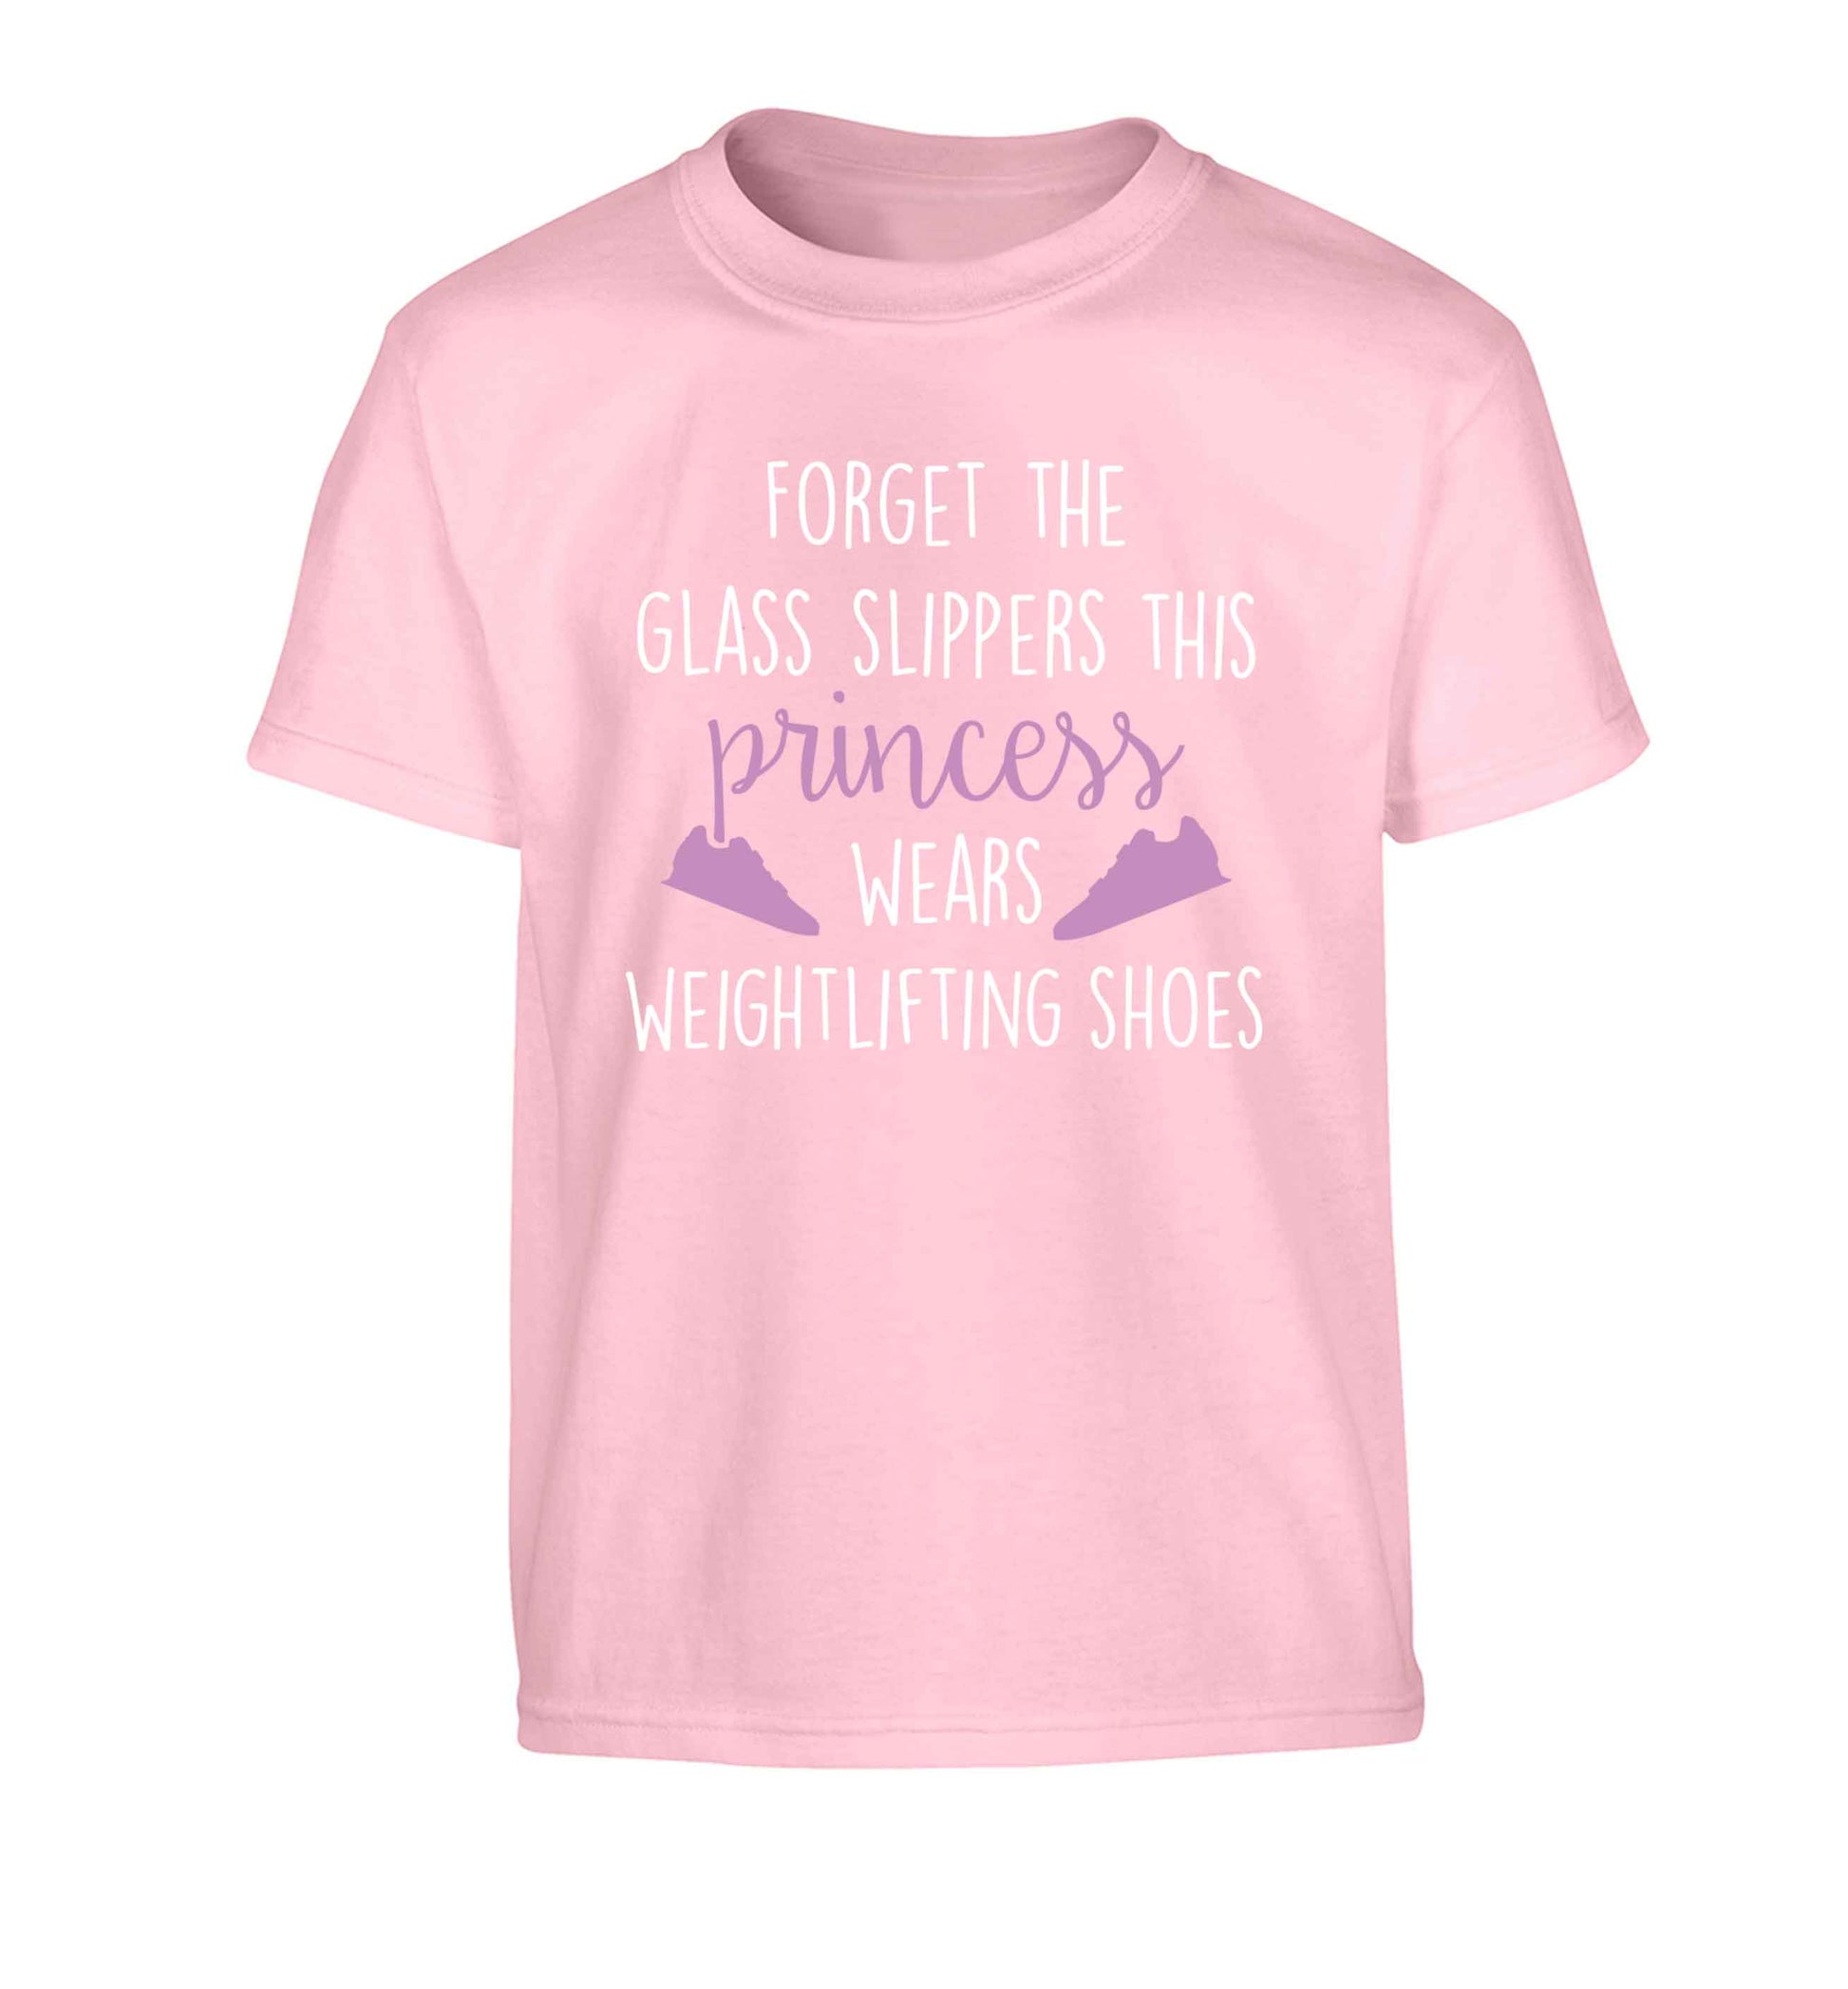 Forget the glass slippers this princess wears weightlifting shoes Children's light pink Tshirt 12-13 Years